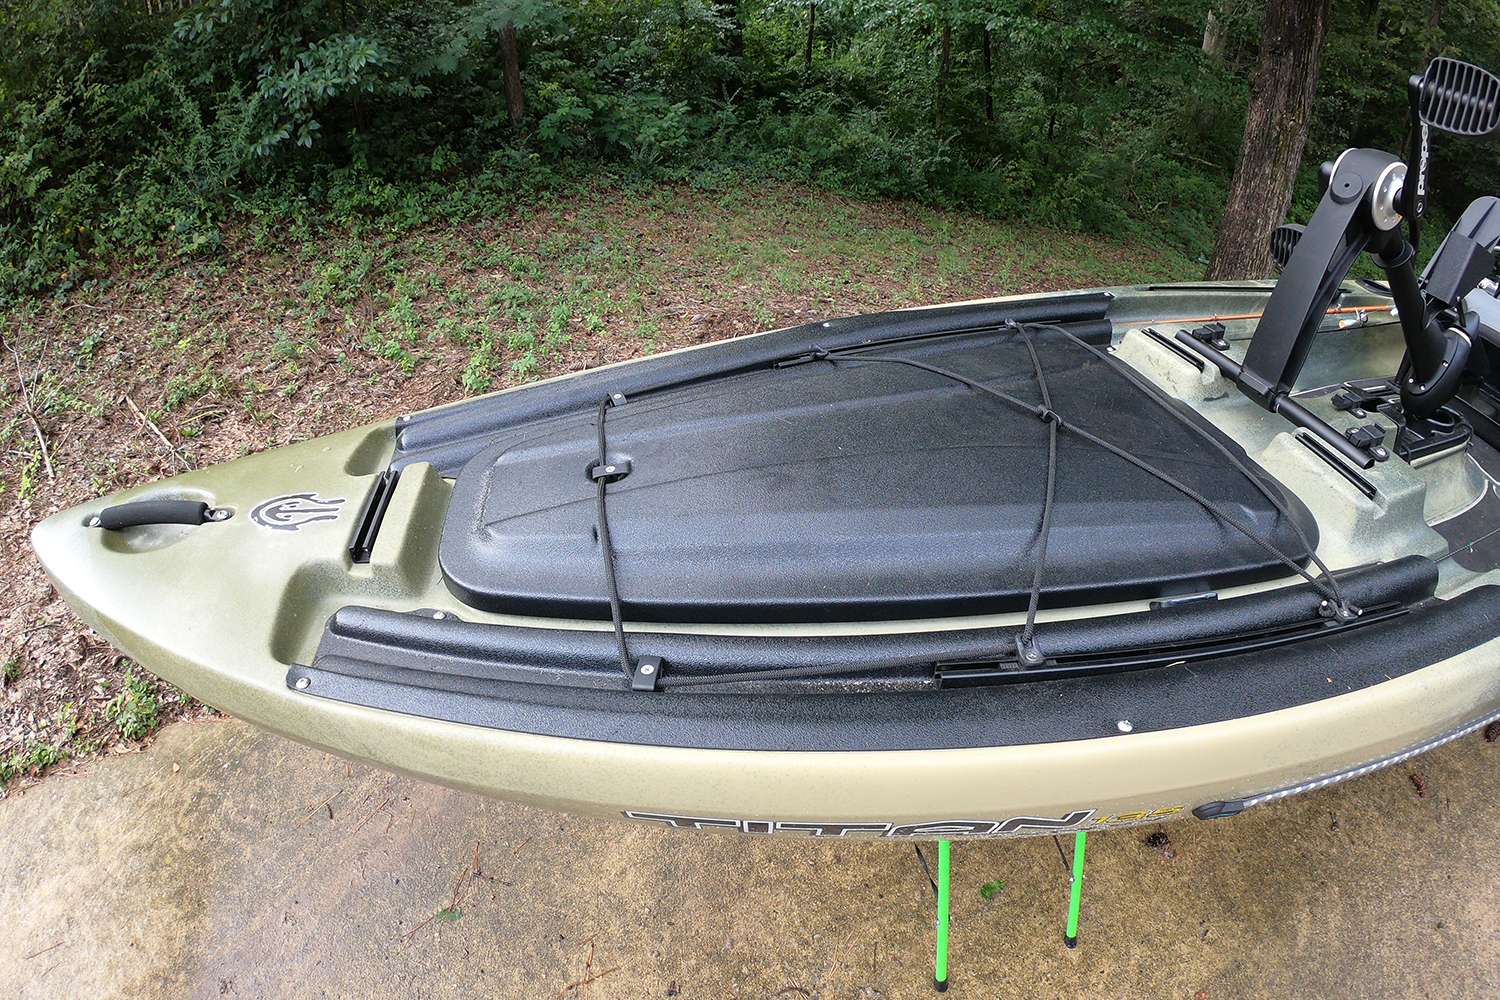 Starting at the front of the boat, it has a handy handle, and a large frontal storage compartment. 